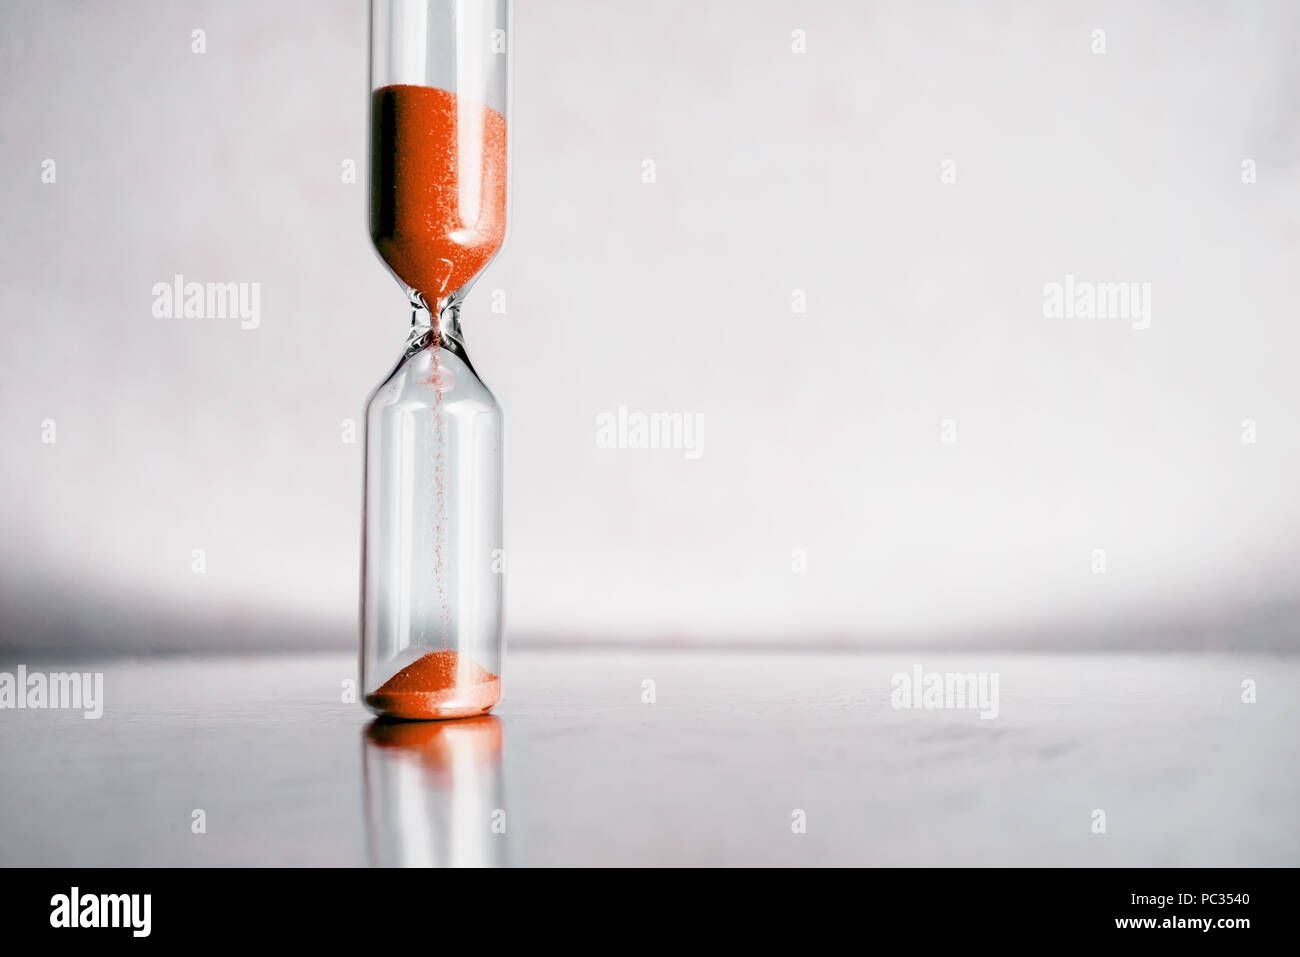 Modern beautiful hourglass with bright background for copy space. Hourglass time passing concept for business deadline, urgency and running out of time. Stock Photo